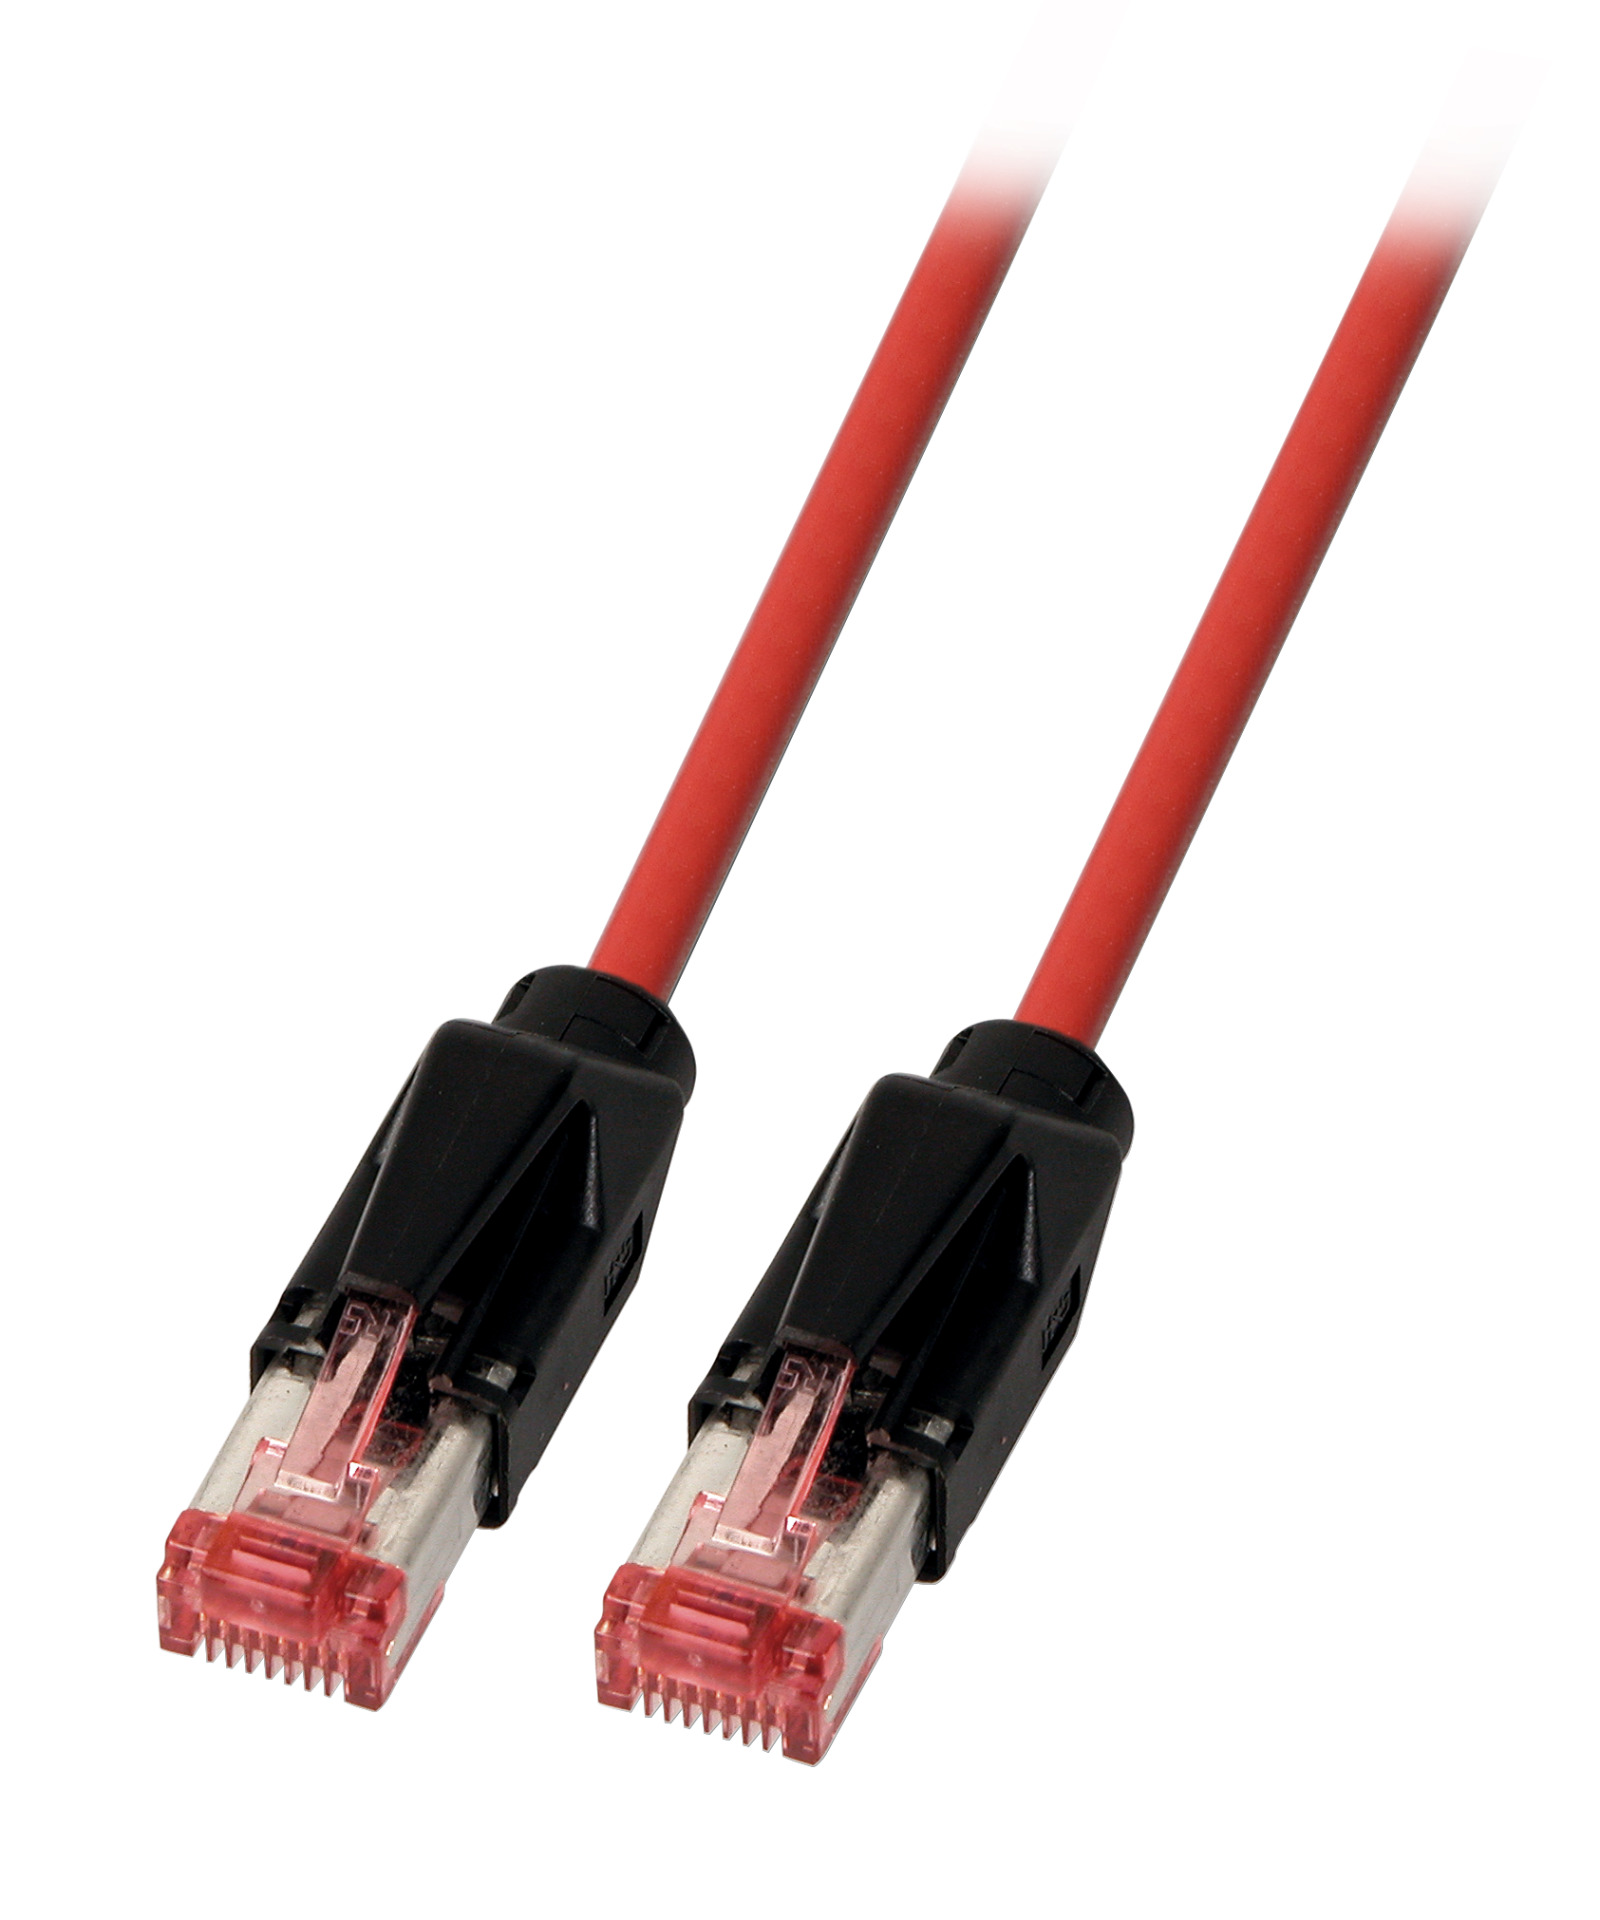 RJ45 Patch cable S/FTP, Cat.6A, TM21, UC900, PUR, 1,5m, red